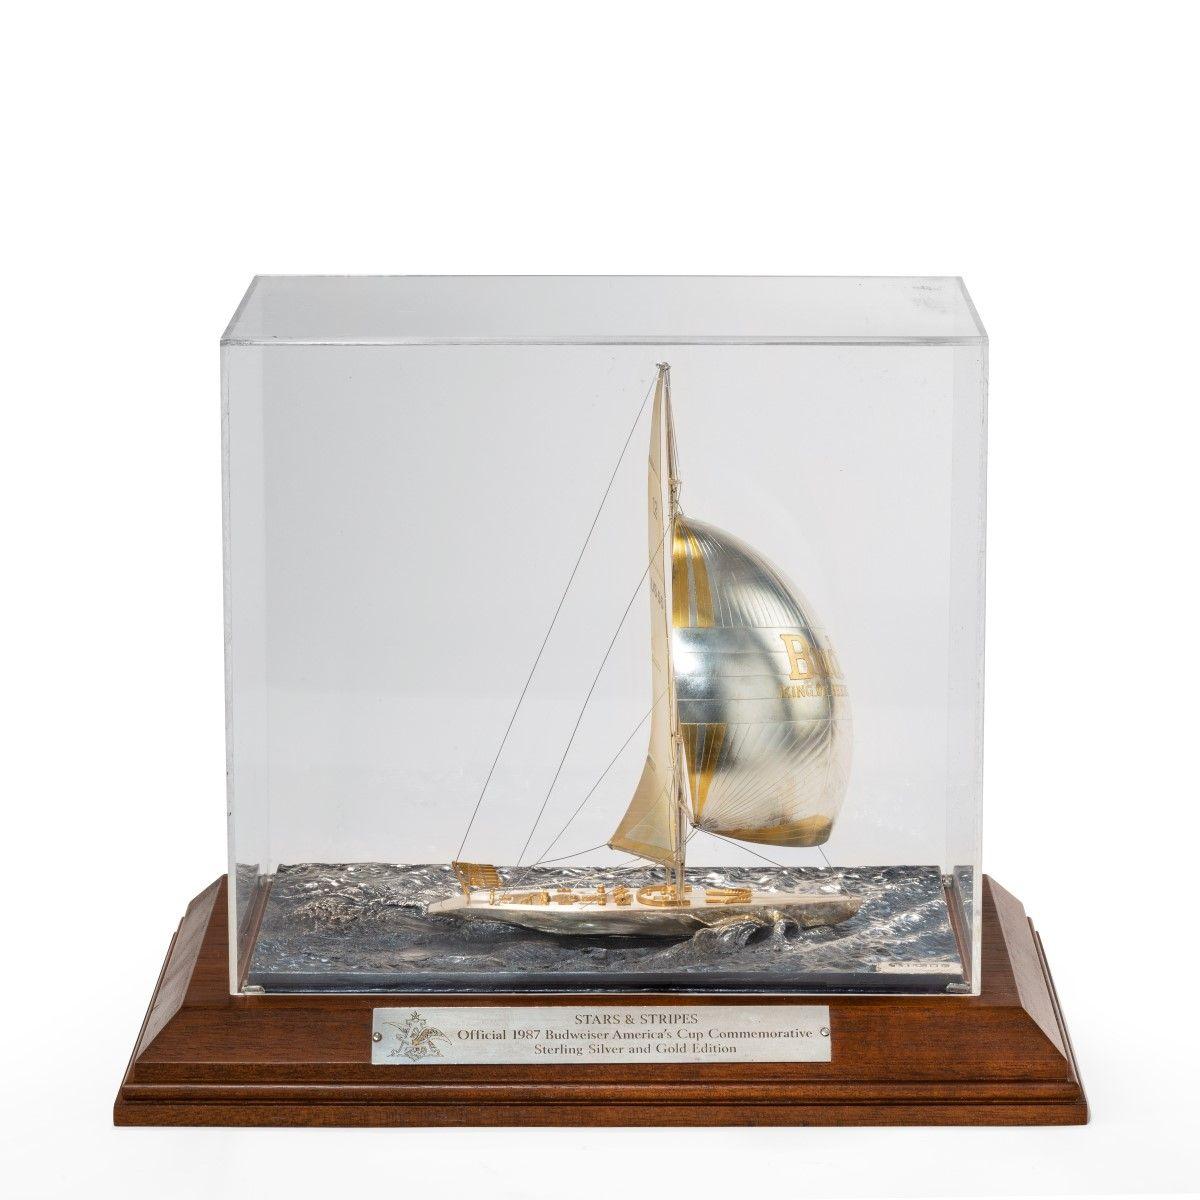 Cased silver and gilt model of 12 Meter America’s Cup yacht Stars & Stripes 87